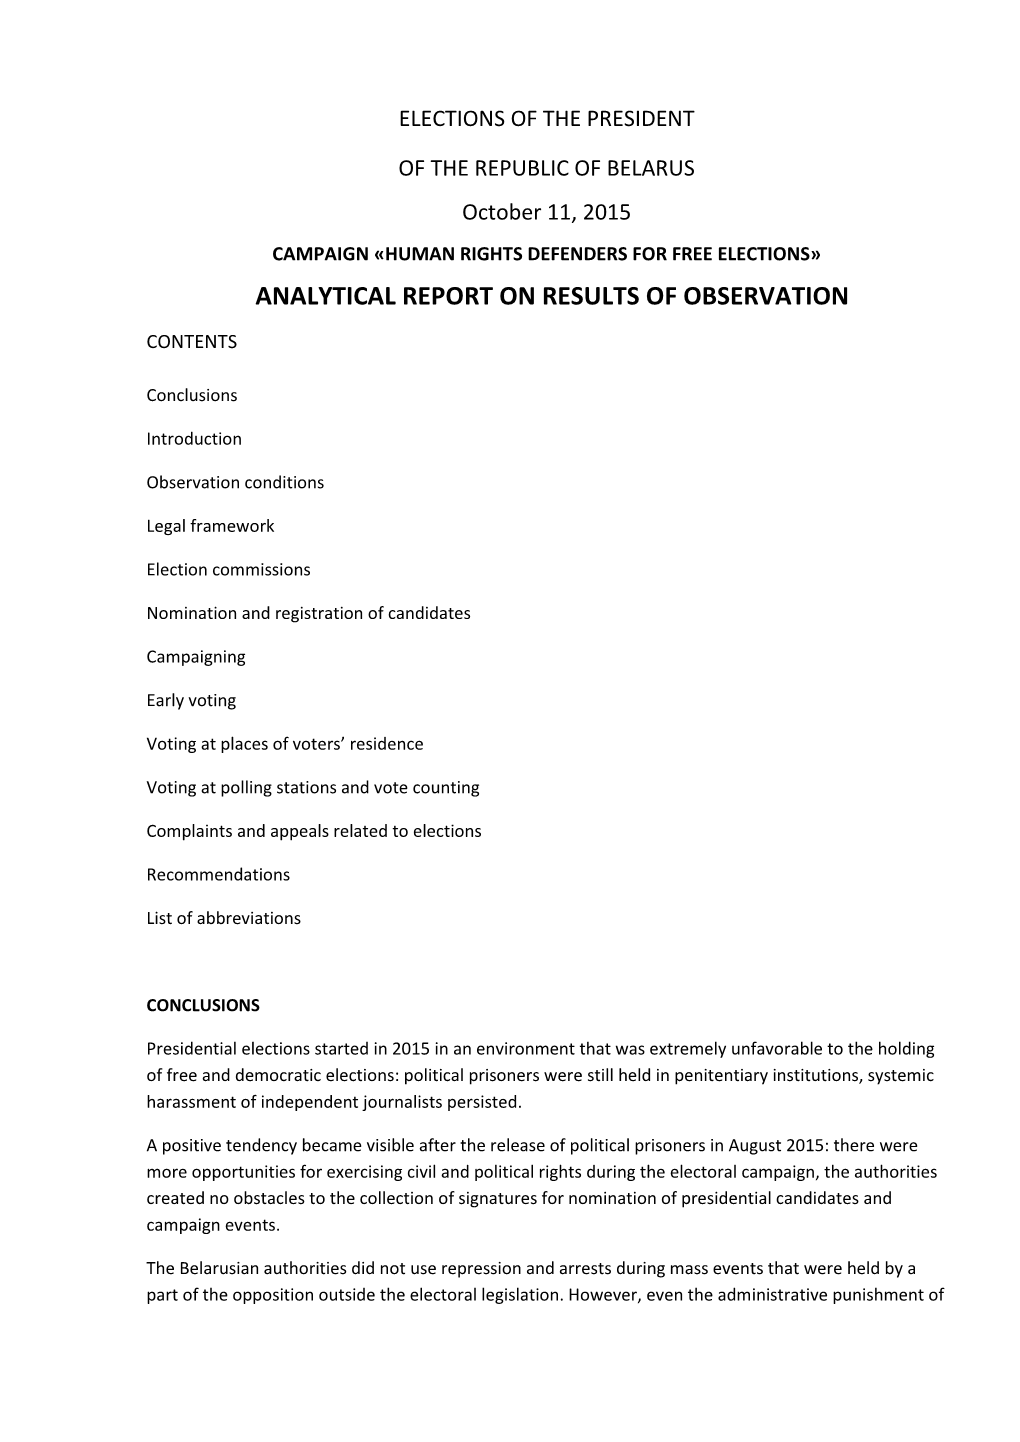 Analytical Report on Results of Observation